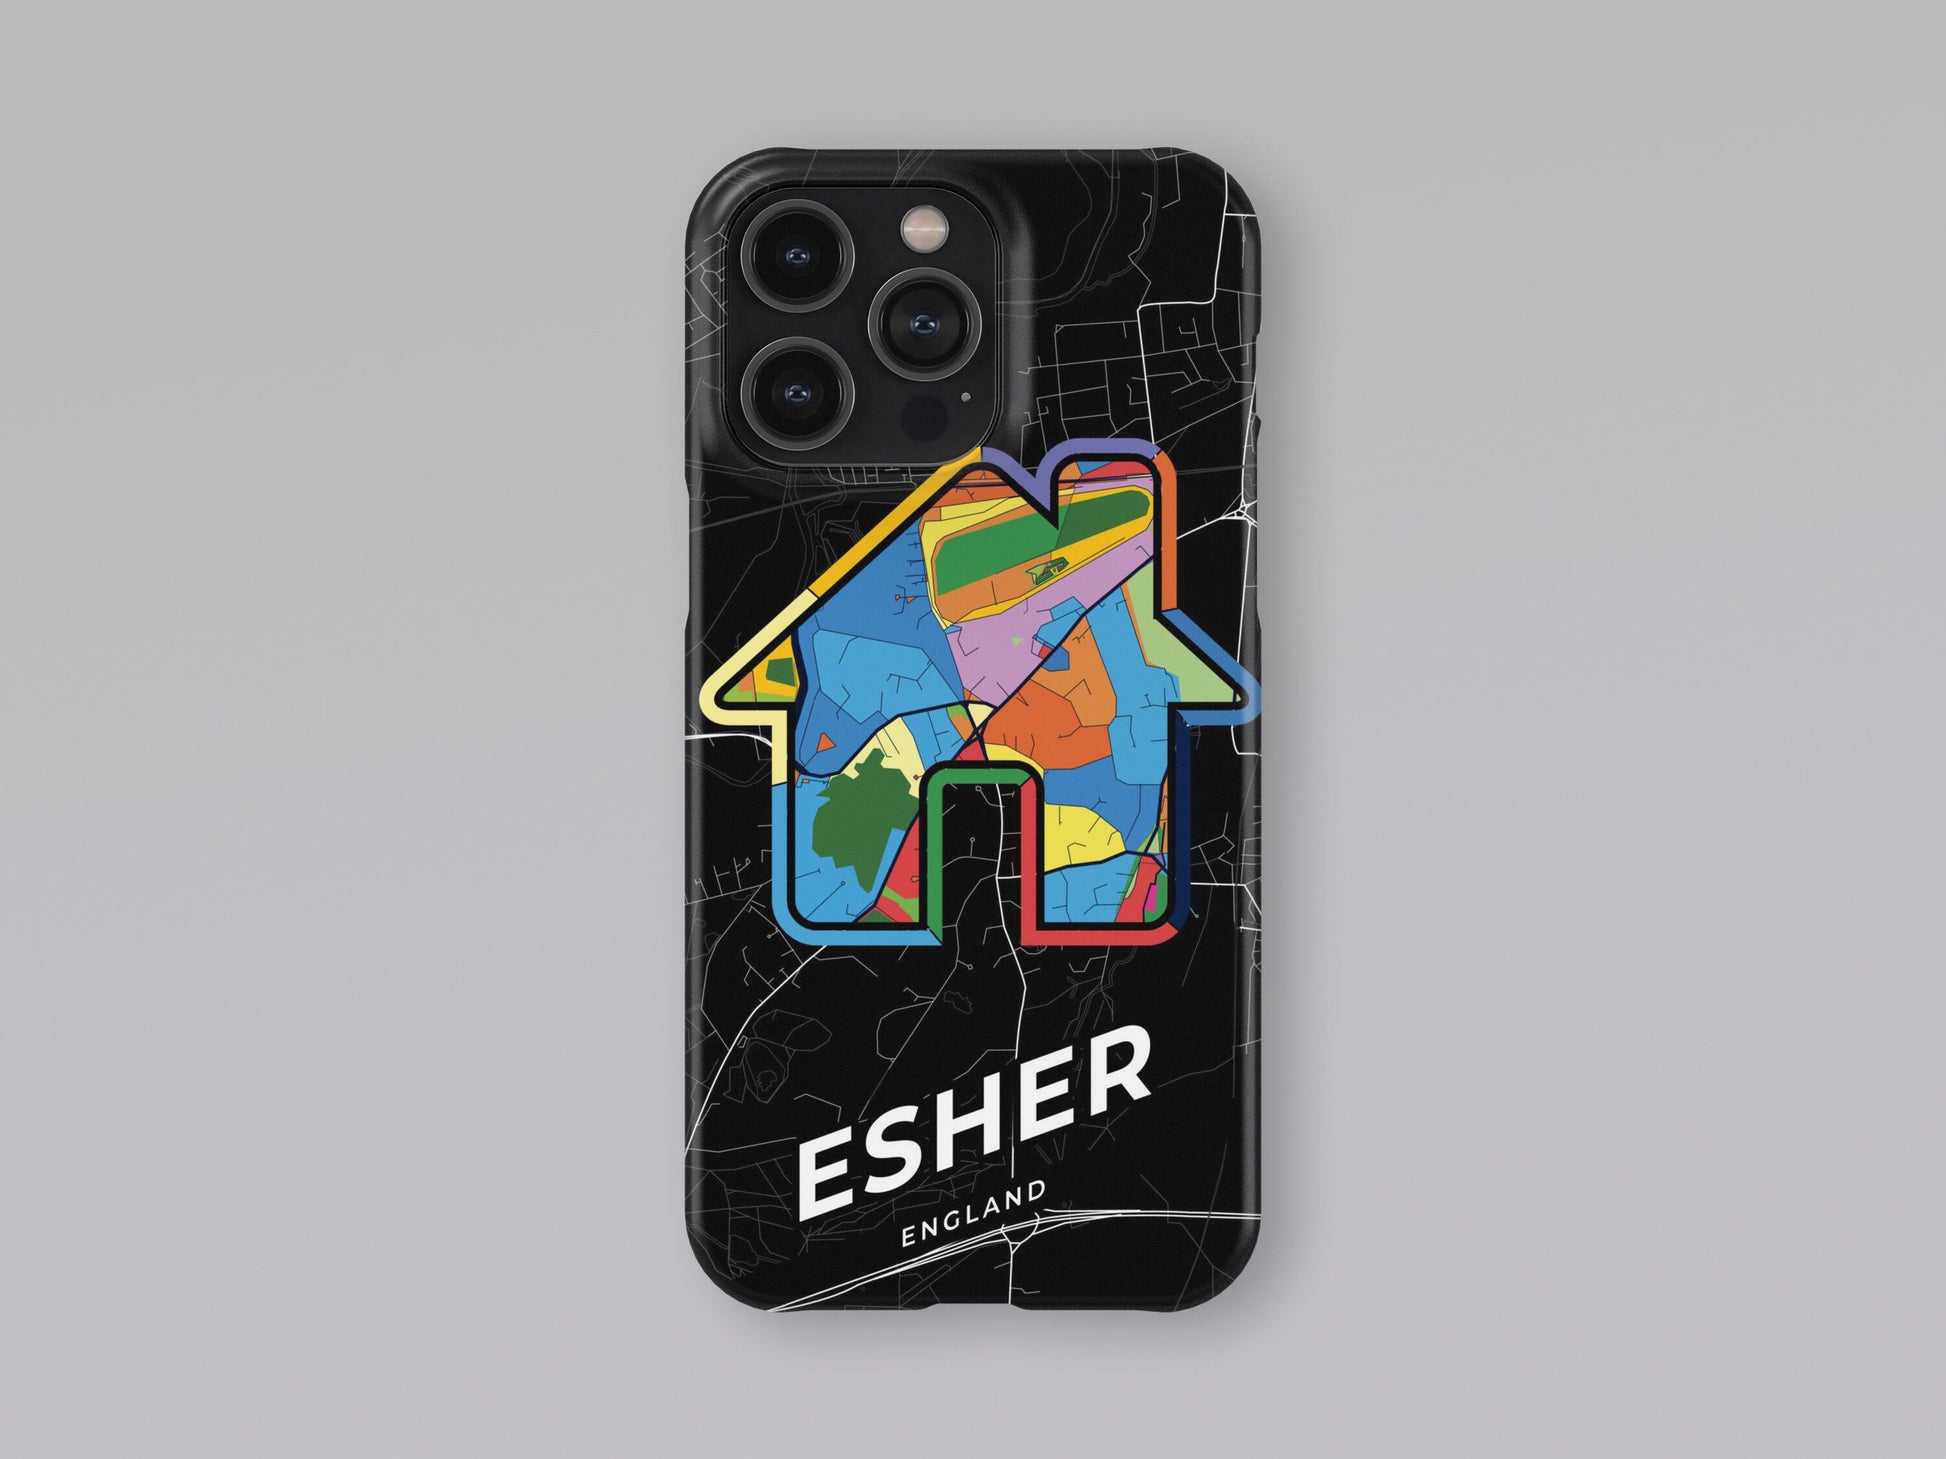 Esher England slim phone case with colorful icon. Birthday, wedding or housewarming gift. Couple match cases. 3